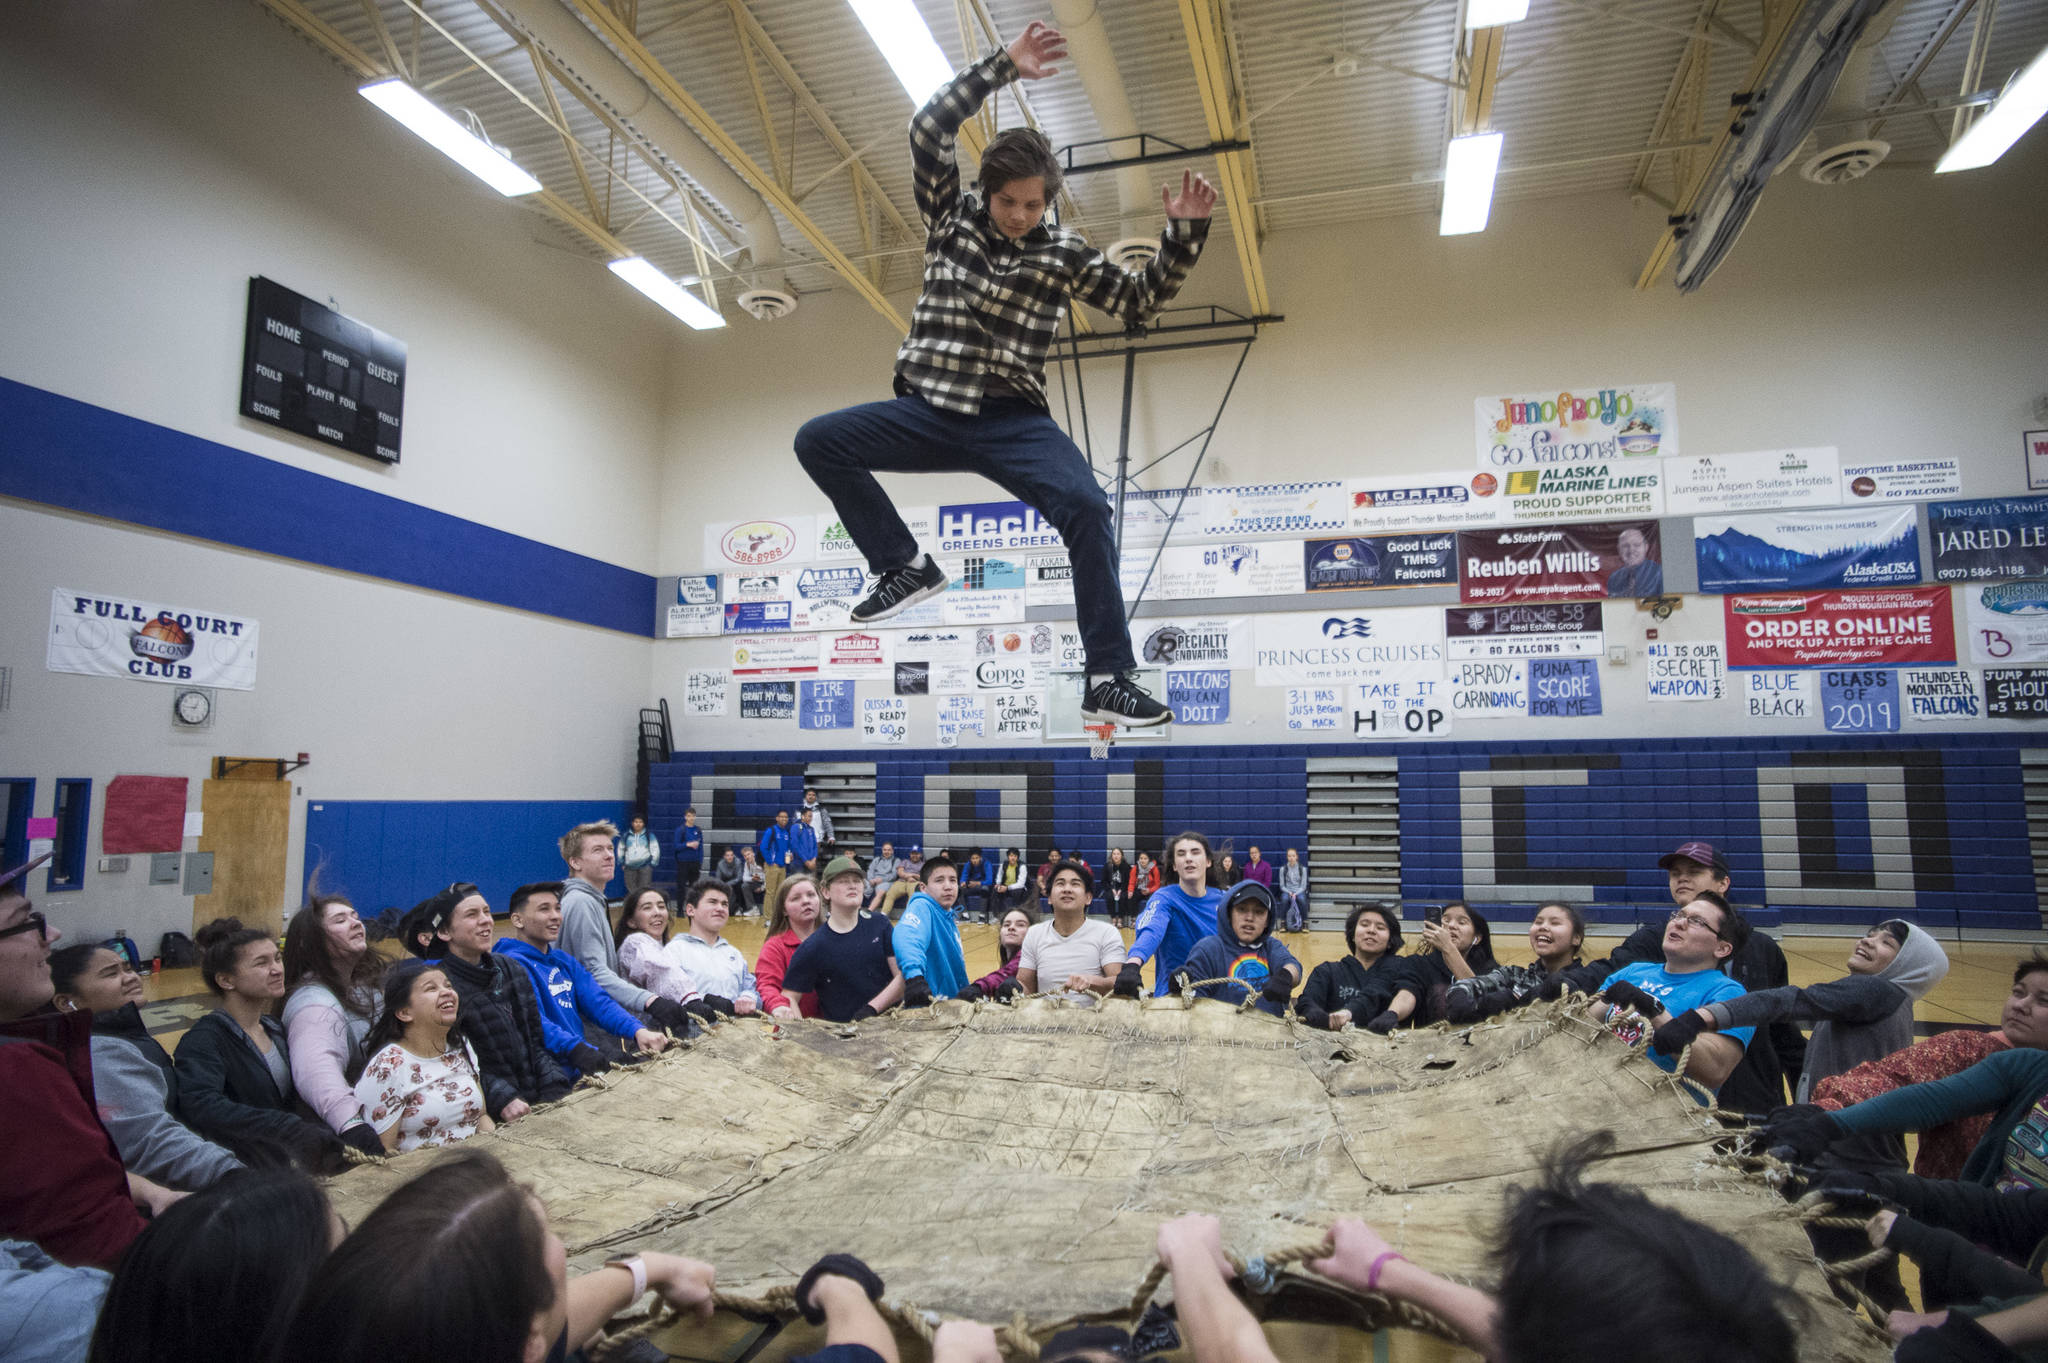 Senior Ashton Oyloe is thrown into the air by fellow students during a blanket toss demonstration at Thunder Mountain High School on Friday, March 15, 2019. (Michael Penn | Juneau Empire)